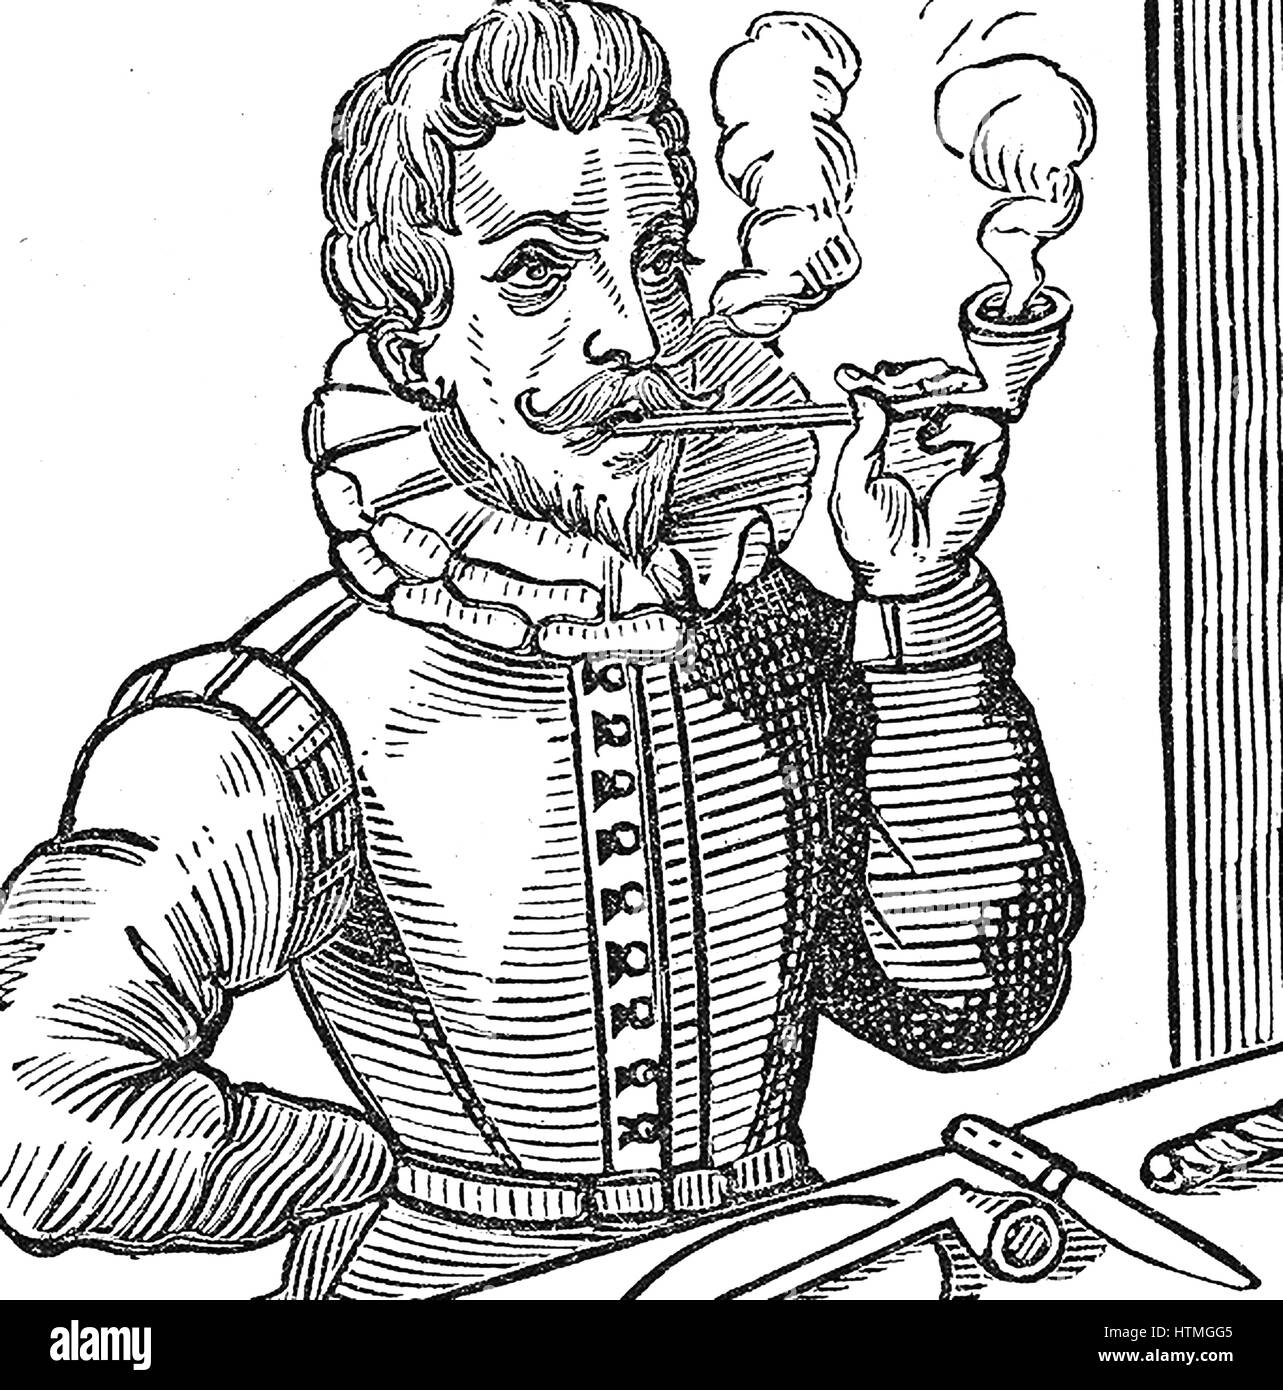 Walter Raleigh (1552-1612) English courtier and navigator. Favourite of Elizabeth I. Half-brother of Humphrey Gilbert. Said to have introduced Tobacco and Potatoes into England. 19th century woodcut. Stock Photo